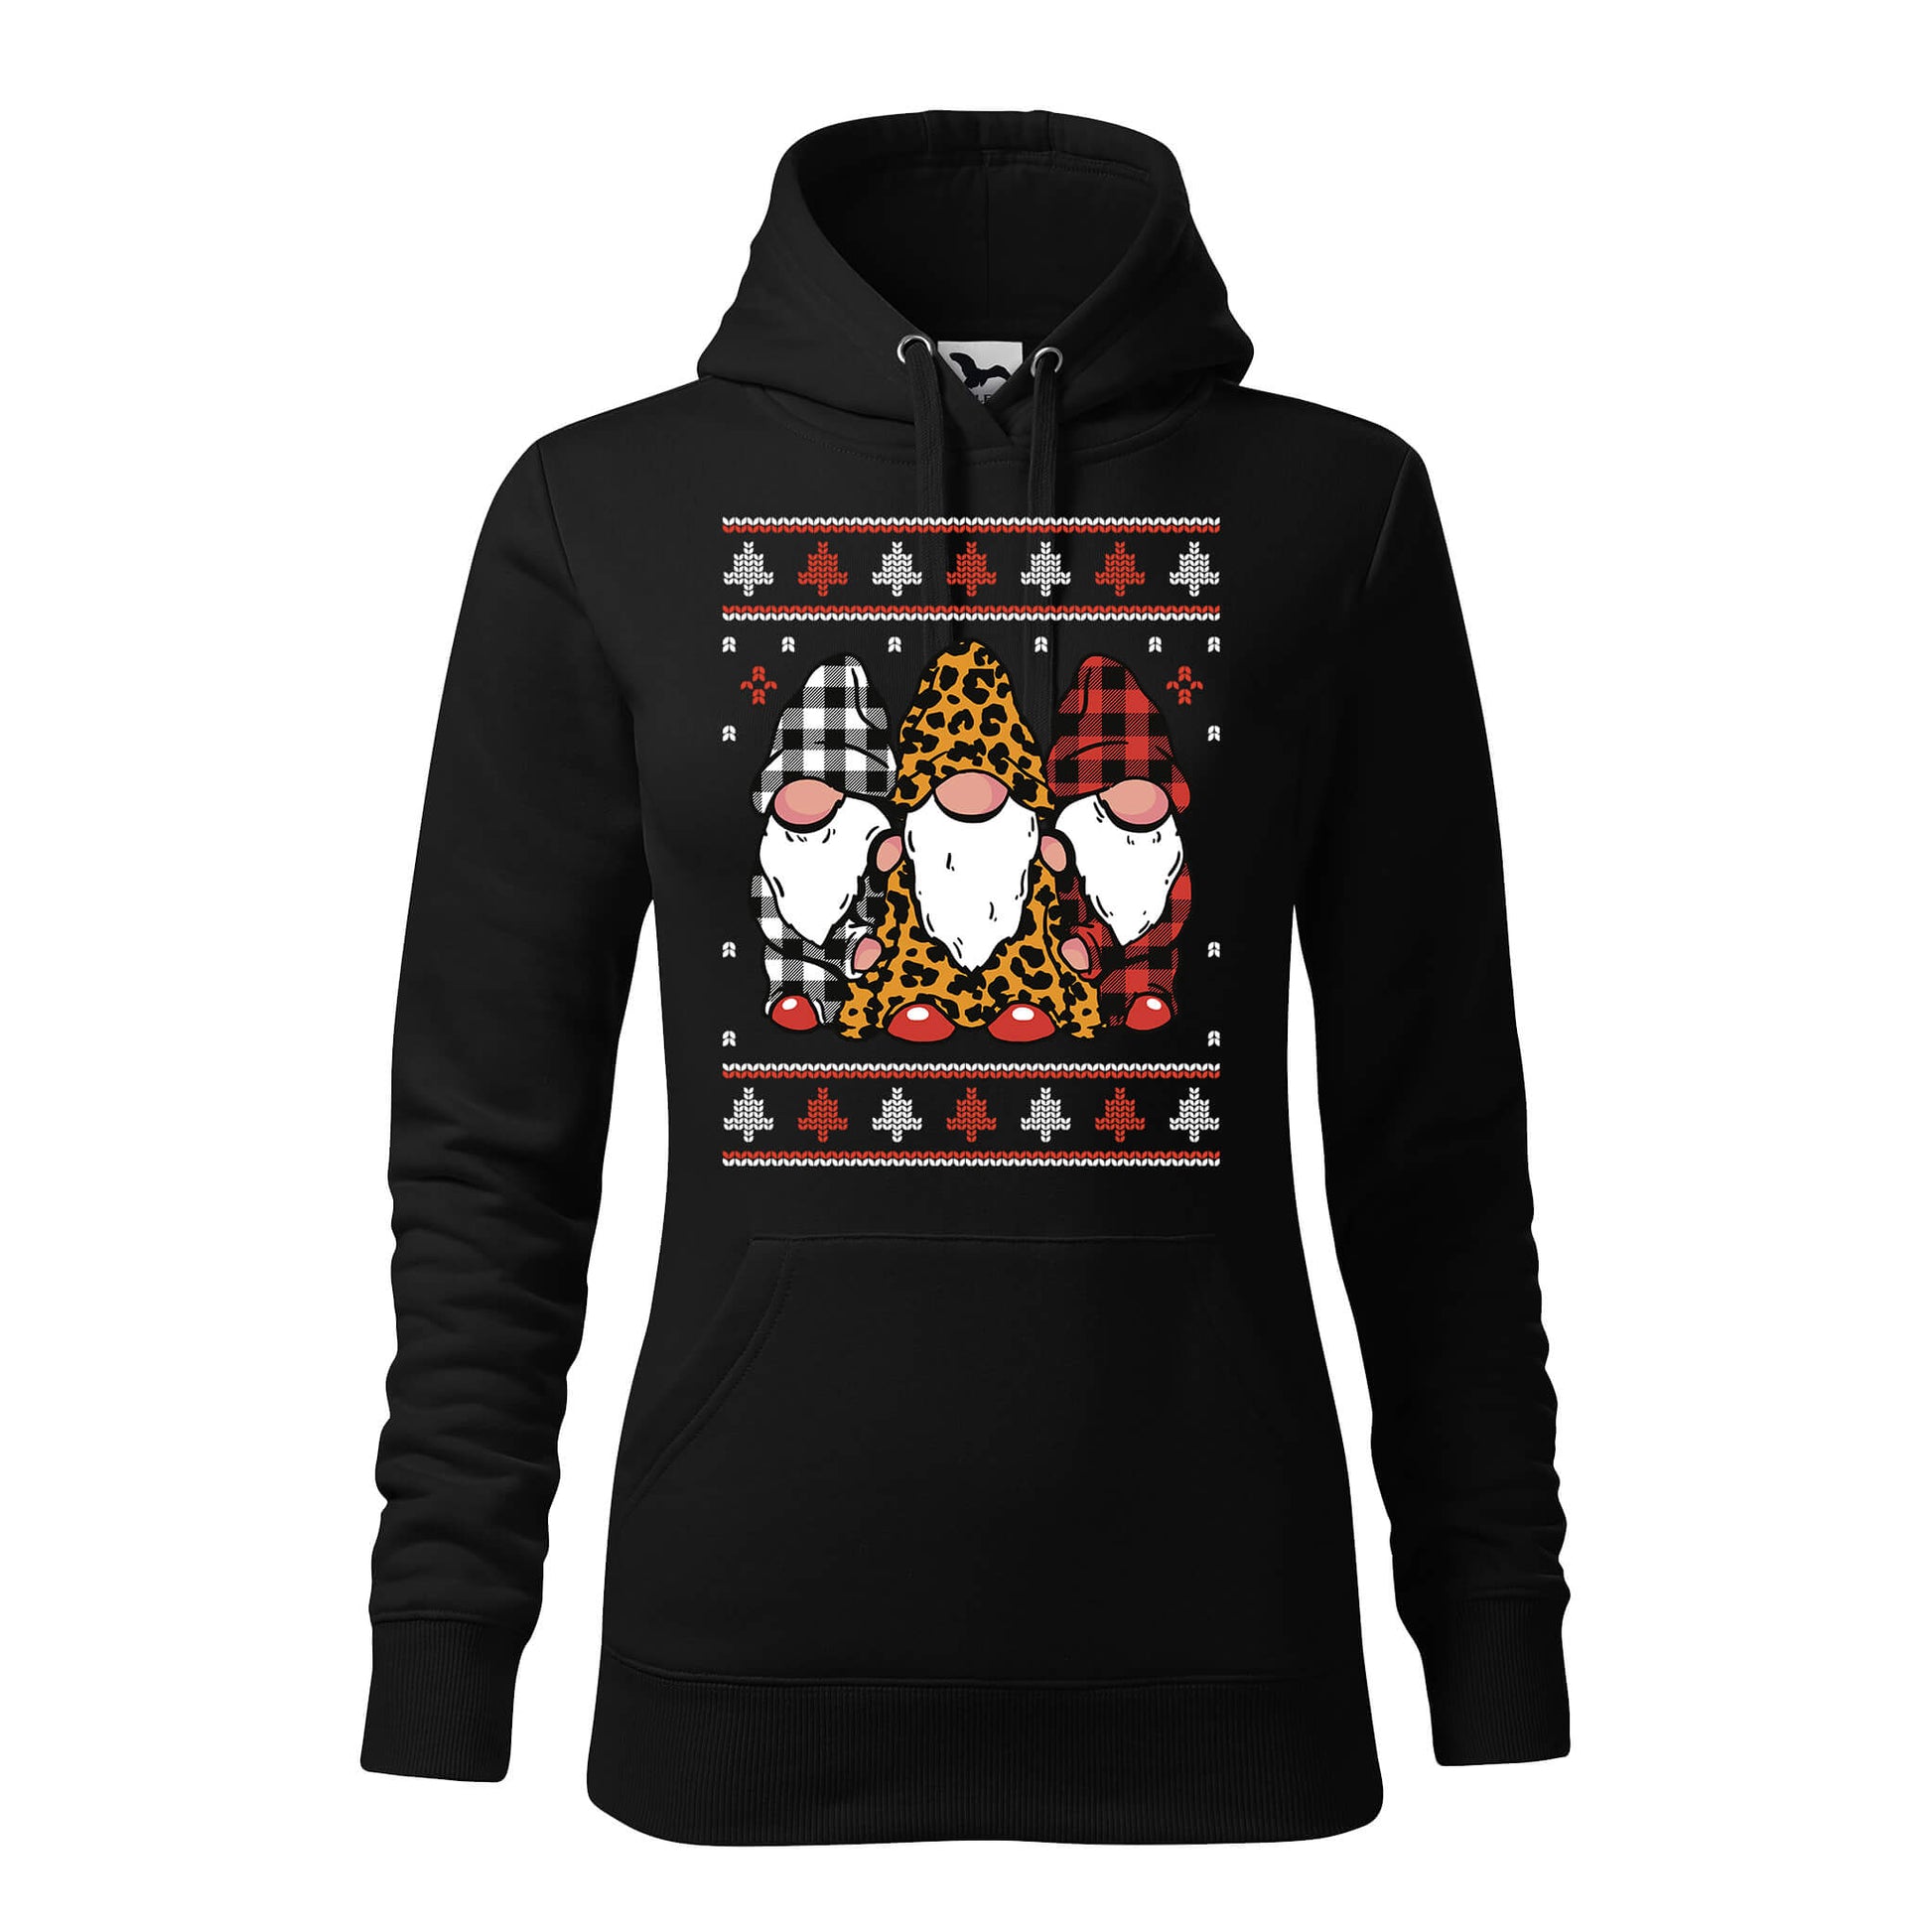 Gnome ugly hoodie - rvdesignprint